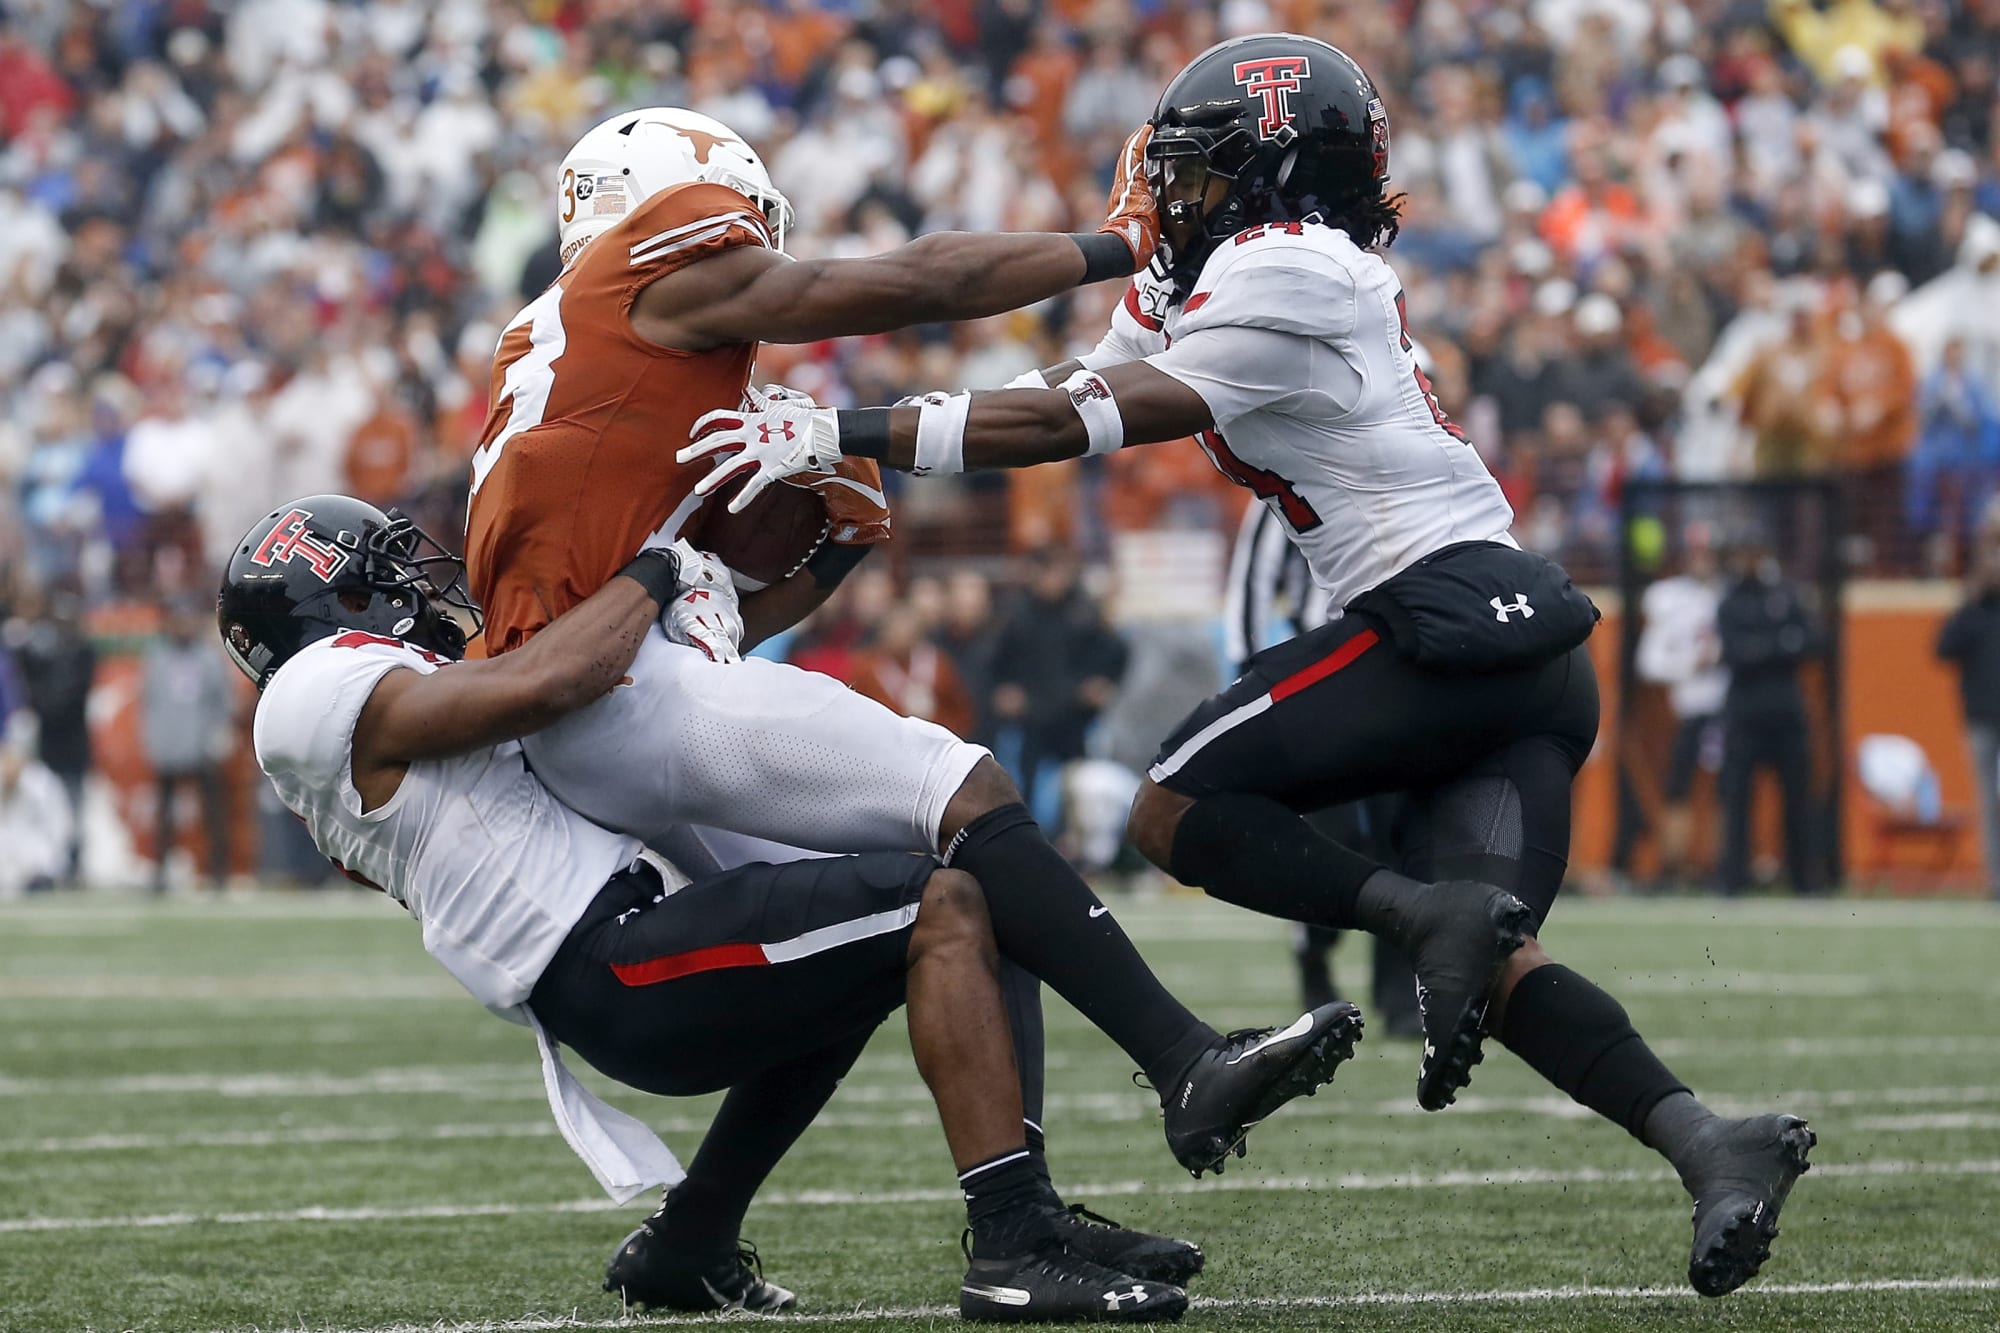 Texas Tech football Important storylines ahead of UT game